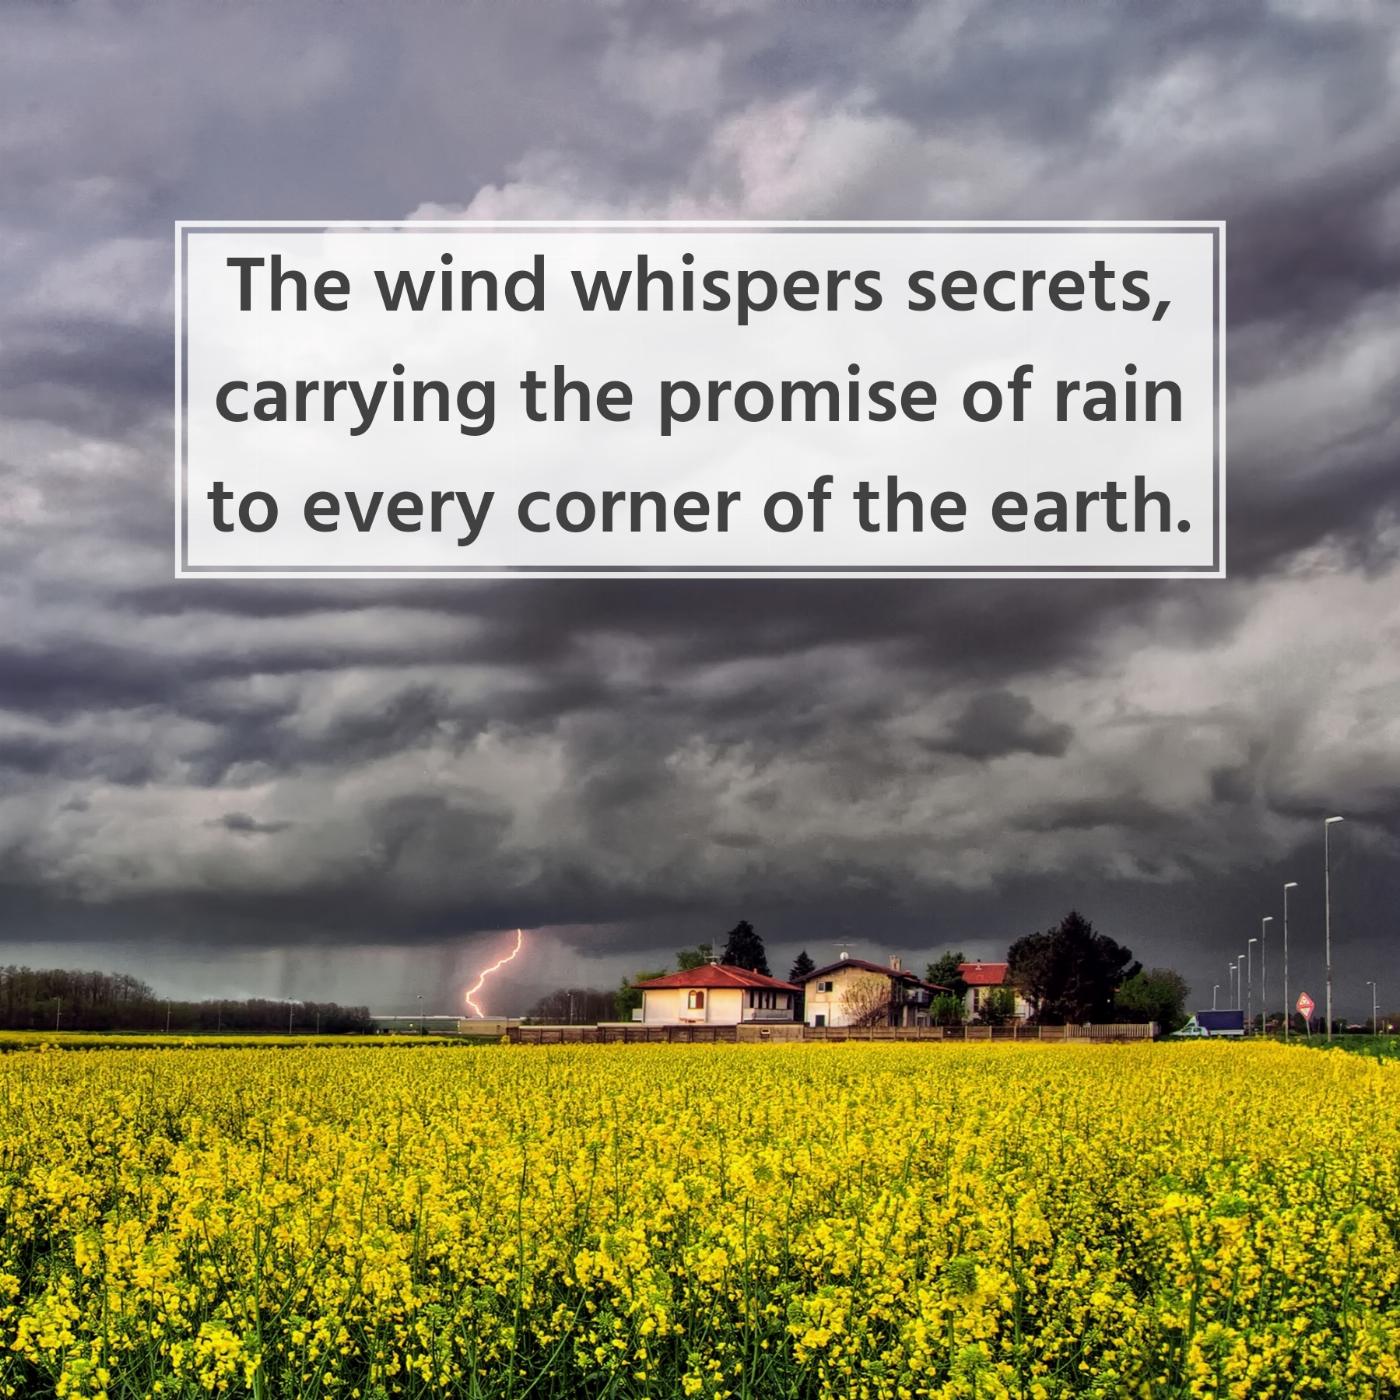 The wind whispers secrets carrying the promise of rain